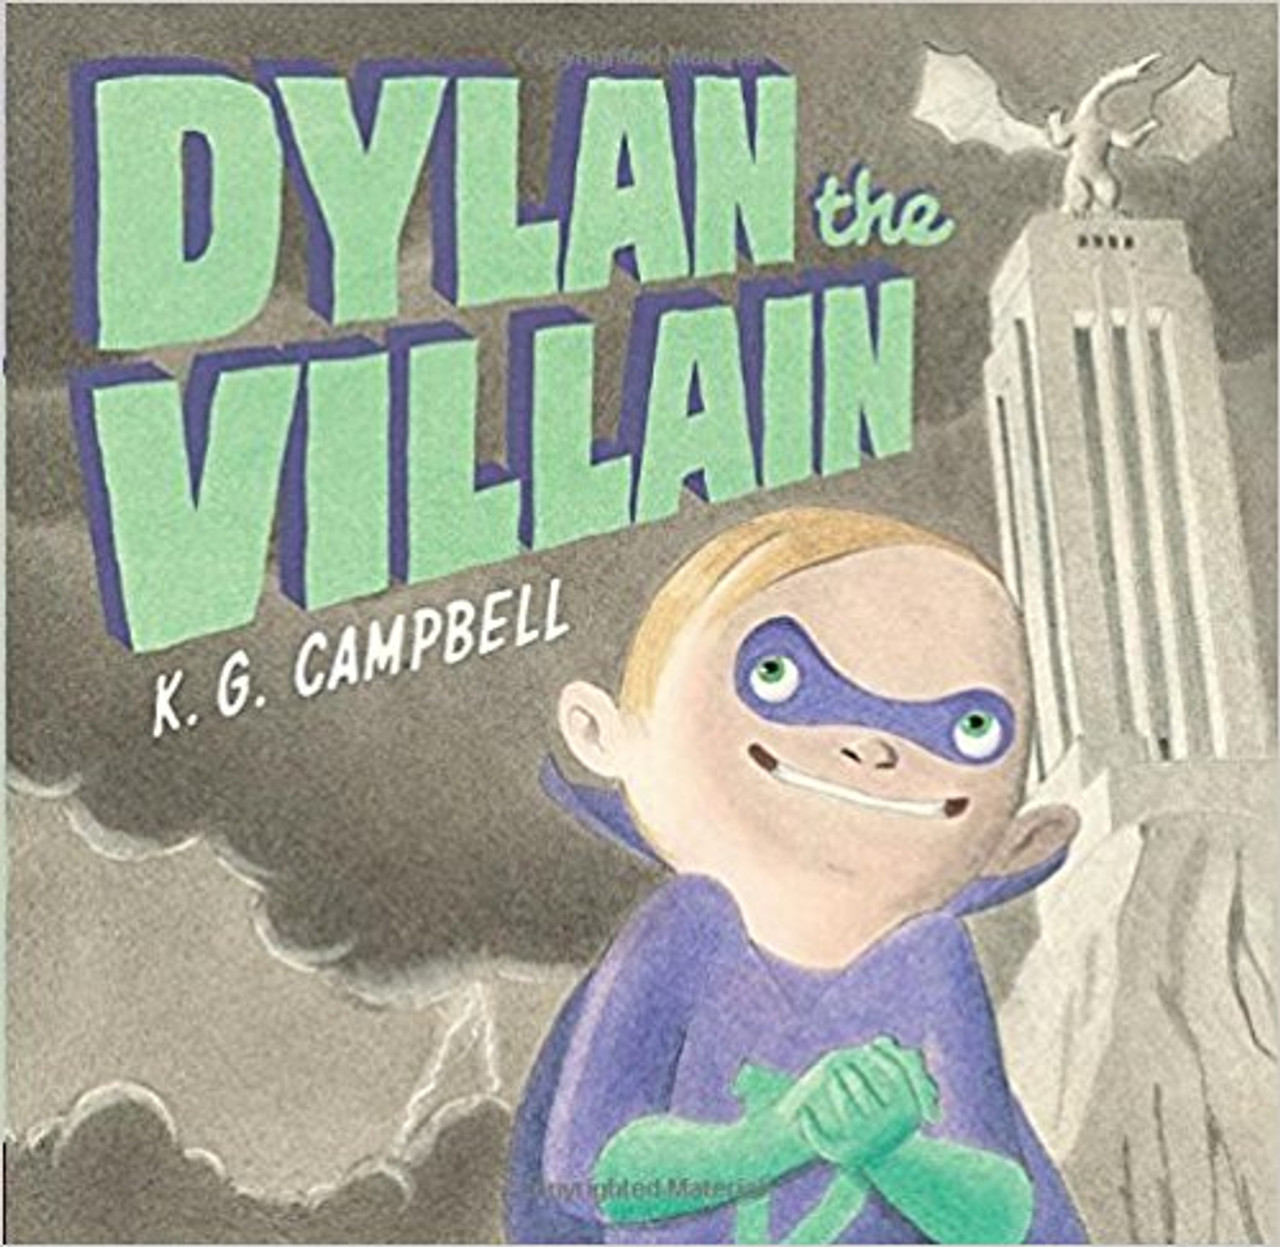 Dylan's parents, Mr. and Mrs. Snivels, have always told him that he is the very best and cleverest super-villain in the whole wide world. And Dylan's confident that it's true--until he starts school and meets Addison Van Malice. Sure, Dylan's costume is scary. But Addison Van Malice's is "bone-chilling." And yes, Dylan's laugh is crazy. But Addison Van Malice's is "bananas." And Dylan's inventions are certainly super-villainous. But Addison Van Malice's are "demonic"! When their teacher, Ms. Ick, announces a Diabolical Robot Building Contest, Dylan sees his opportunity to prove that he really is the most evil villain of all. But Addison's not giving in without a fight. And so begins a competition of skill and wits that doesn't go the way "anyone "expected...